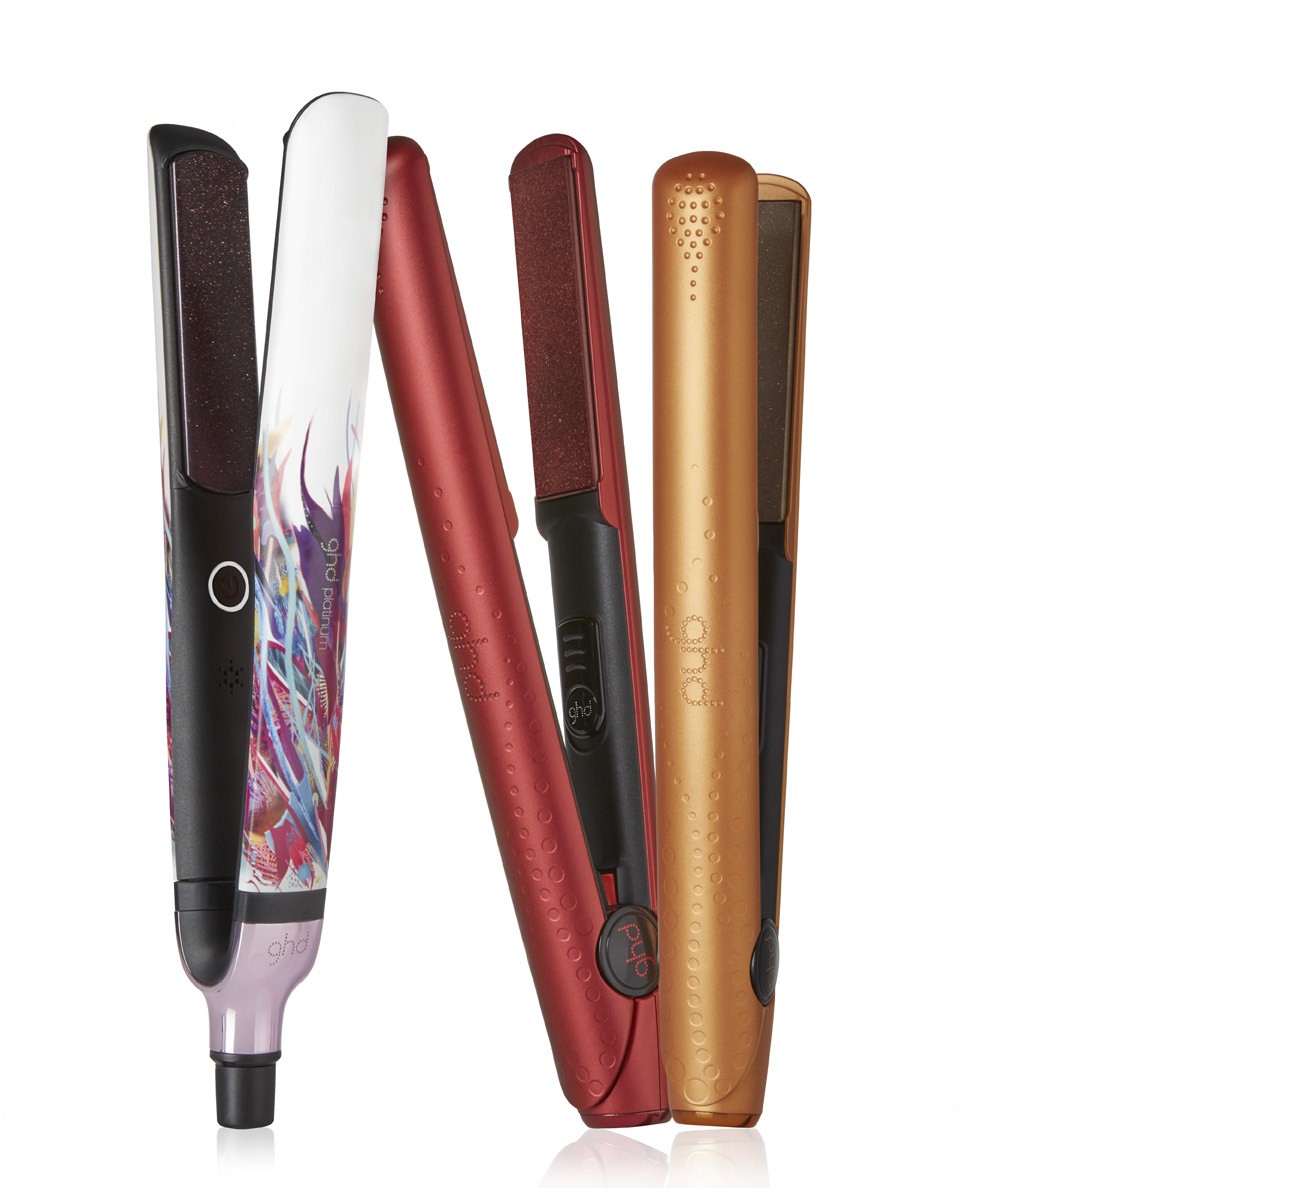 Buy Ghd Platinum Professional Styler Tropic Sky Limited Edition